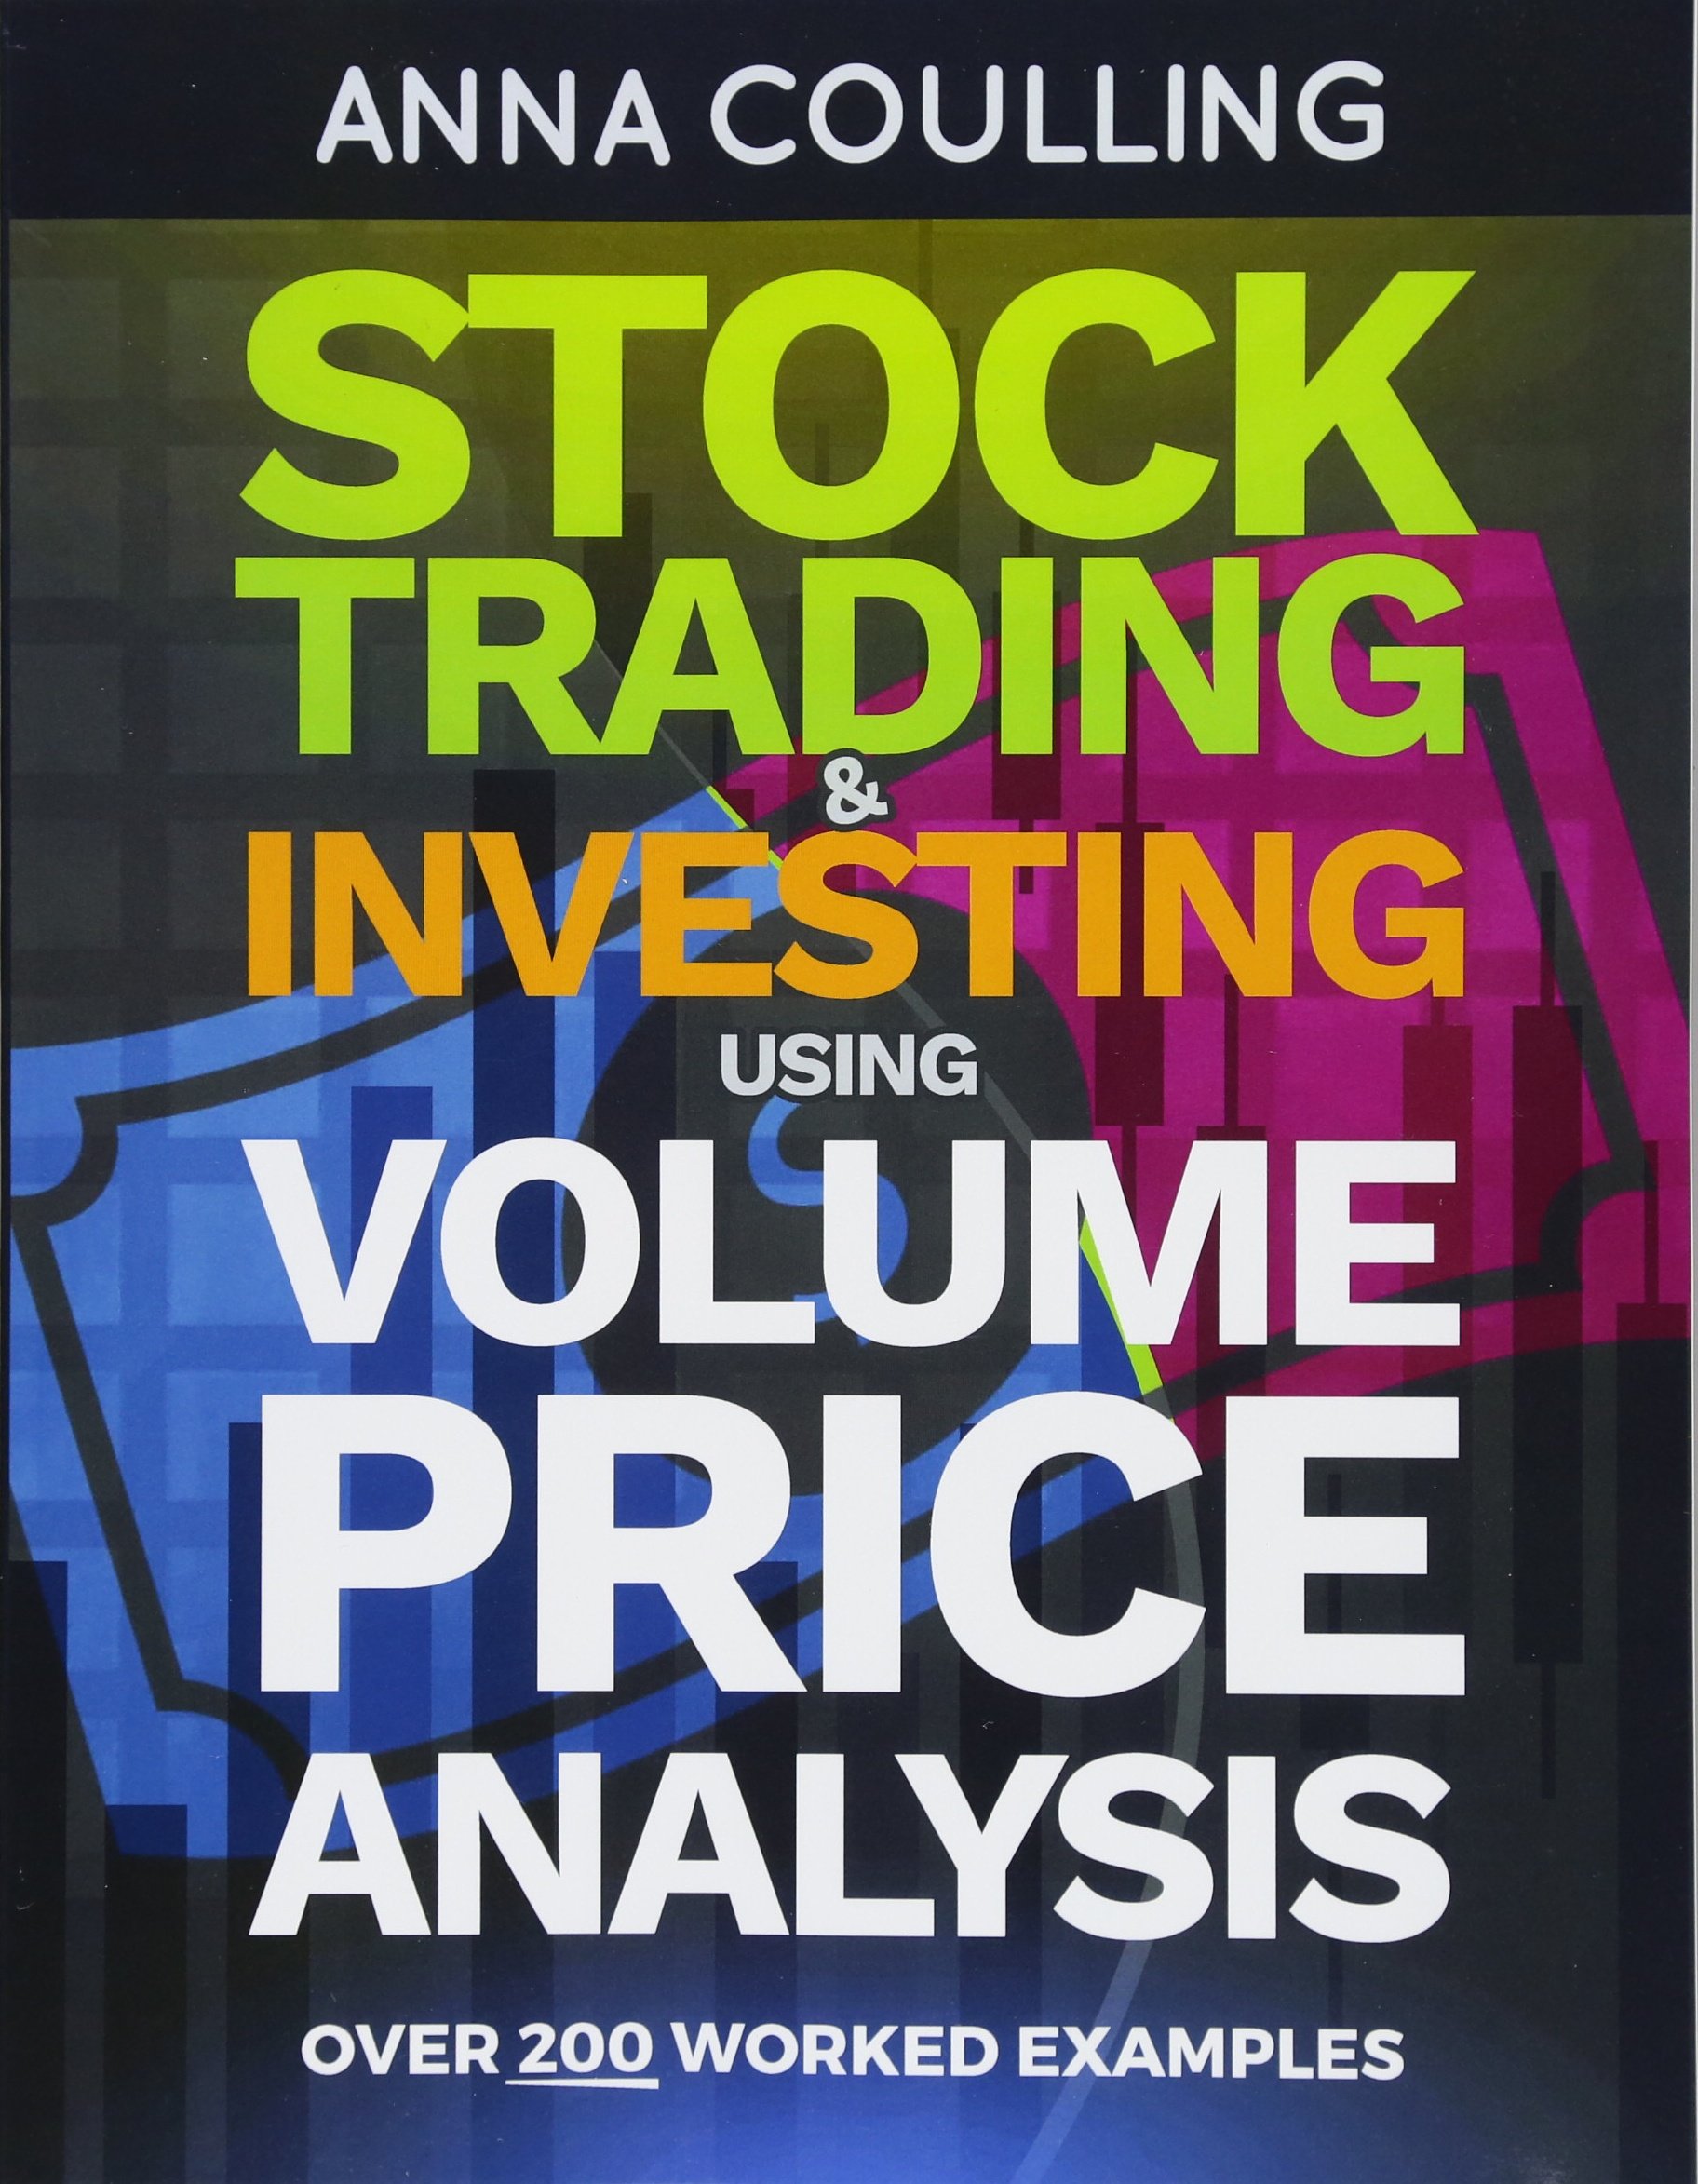 Book Cover Stock Trading & Investing Using Volume Price Analysis: Over 200 worked examples